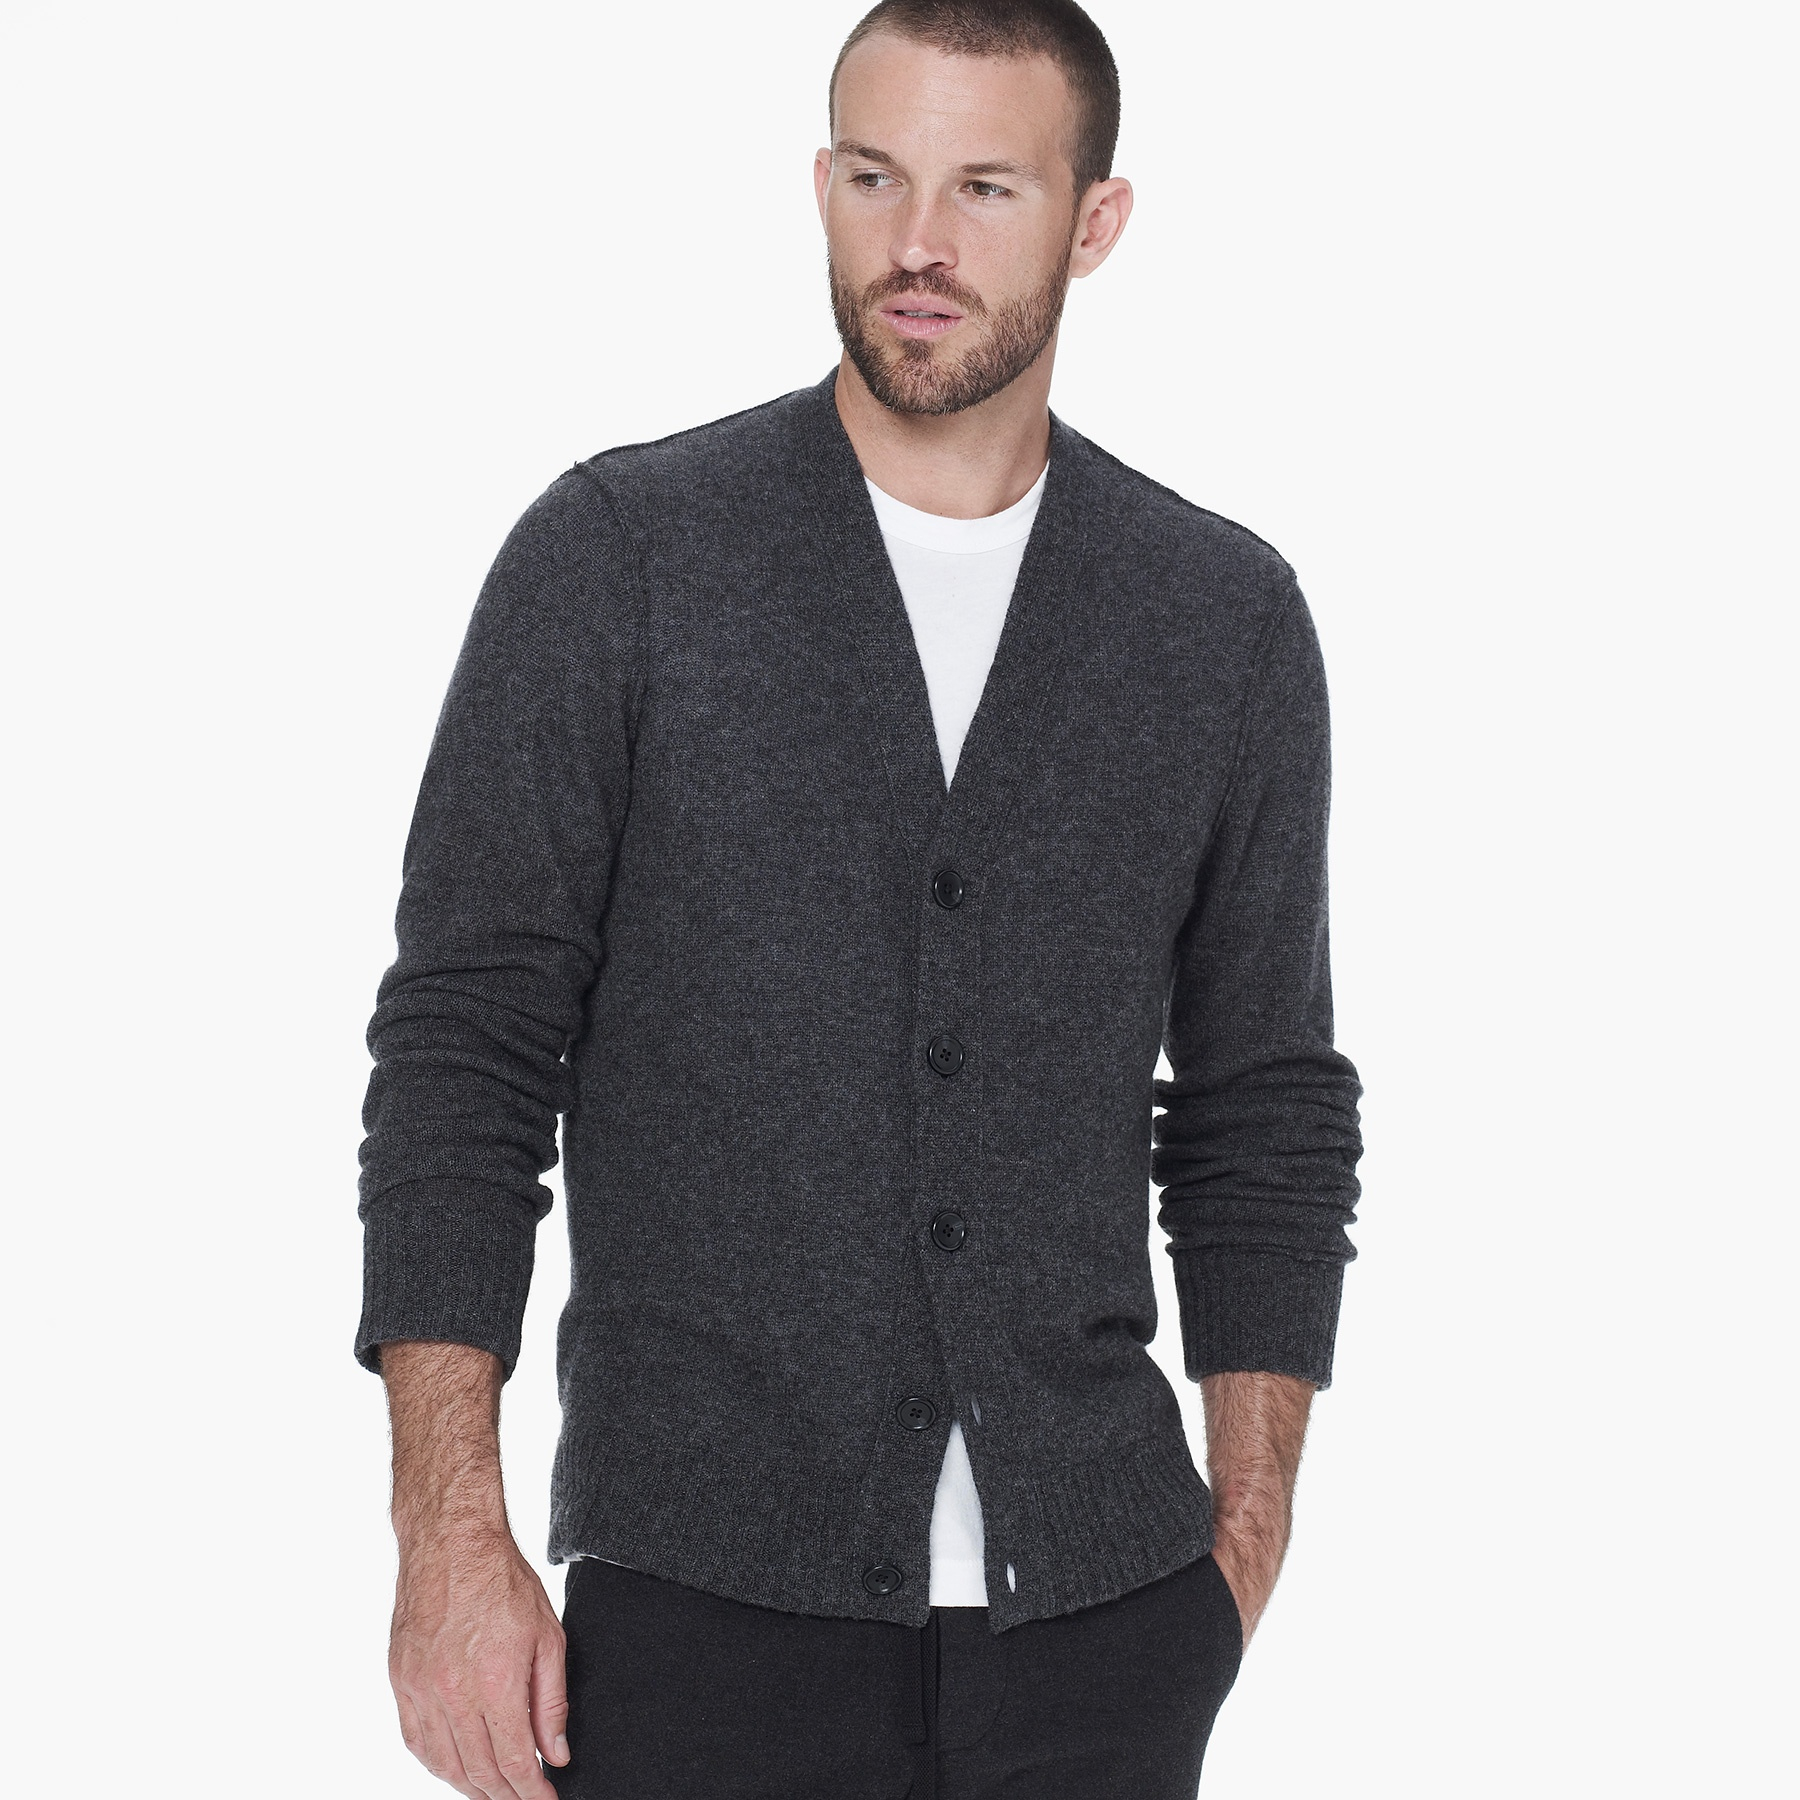 Lyst - James Perse Lightweight Cashmere Cardigan in Gray for Men